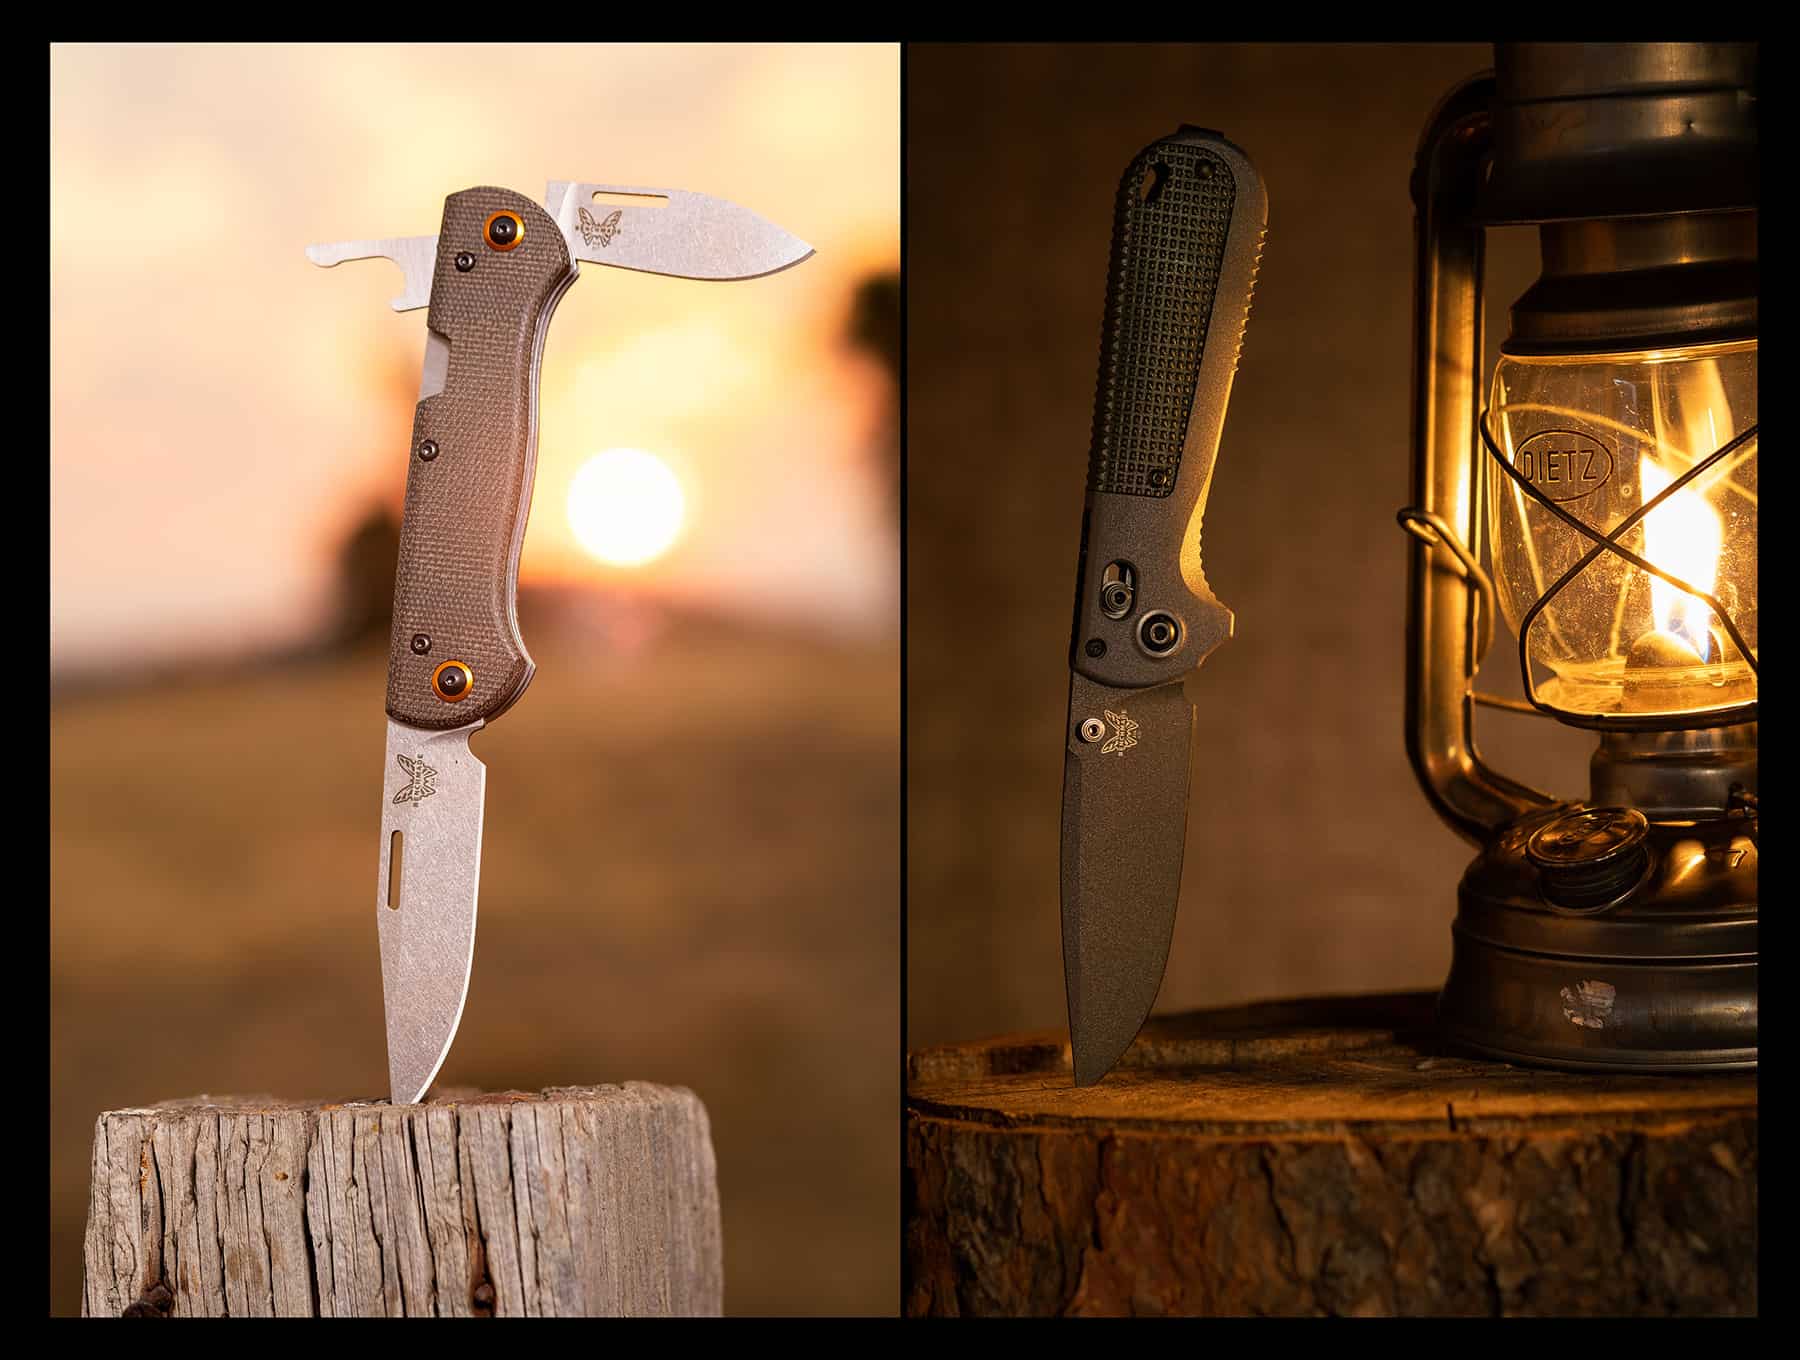 The Benchmade Reboubt and Weekender, pictured here, are two of our favorite American made Benchmade knives.